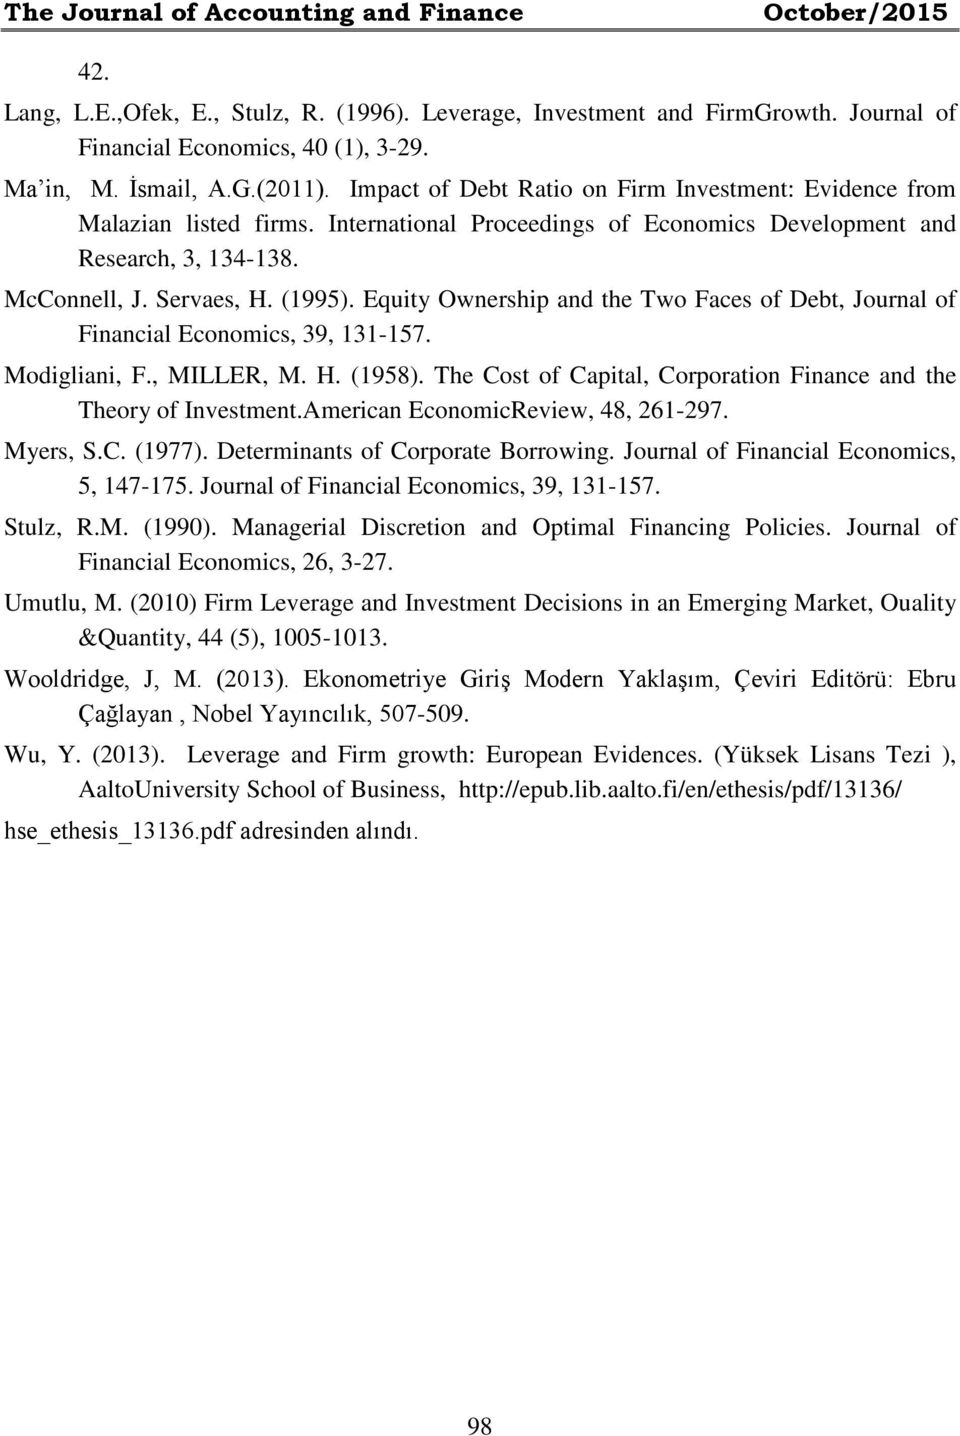 Equity Ownership and the Two Faces of Debt Journal of Financial Economics 39 131-157. Modigliani F. MILLER M. H. (1958). The Cost of Capital Corporation Finance and the Theory of Investment.